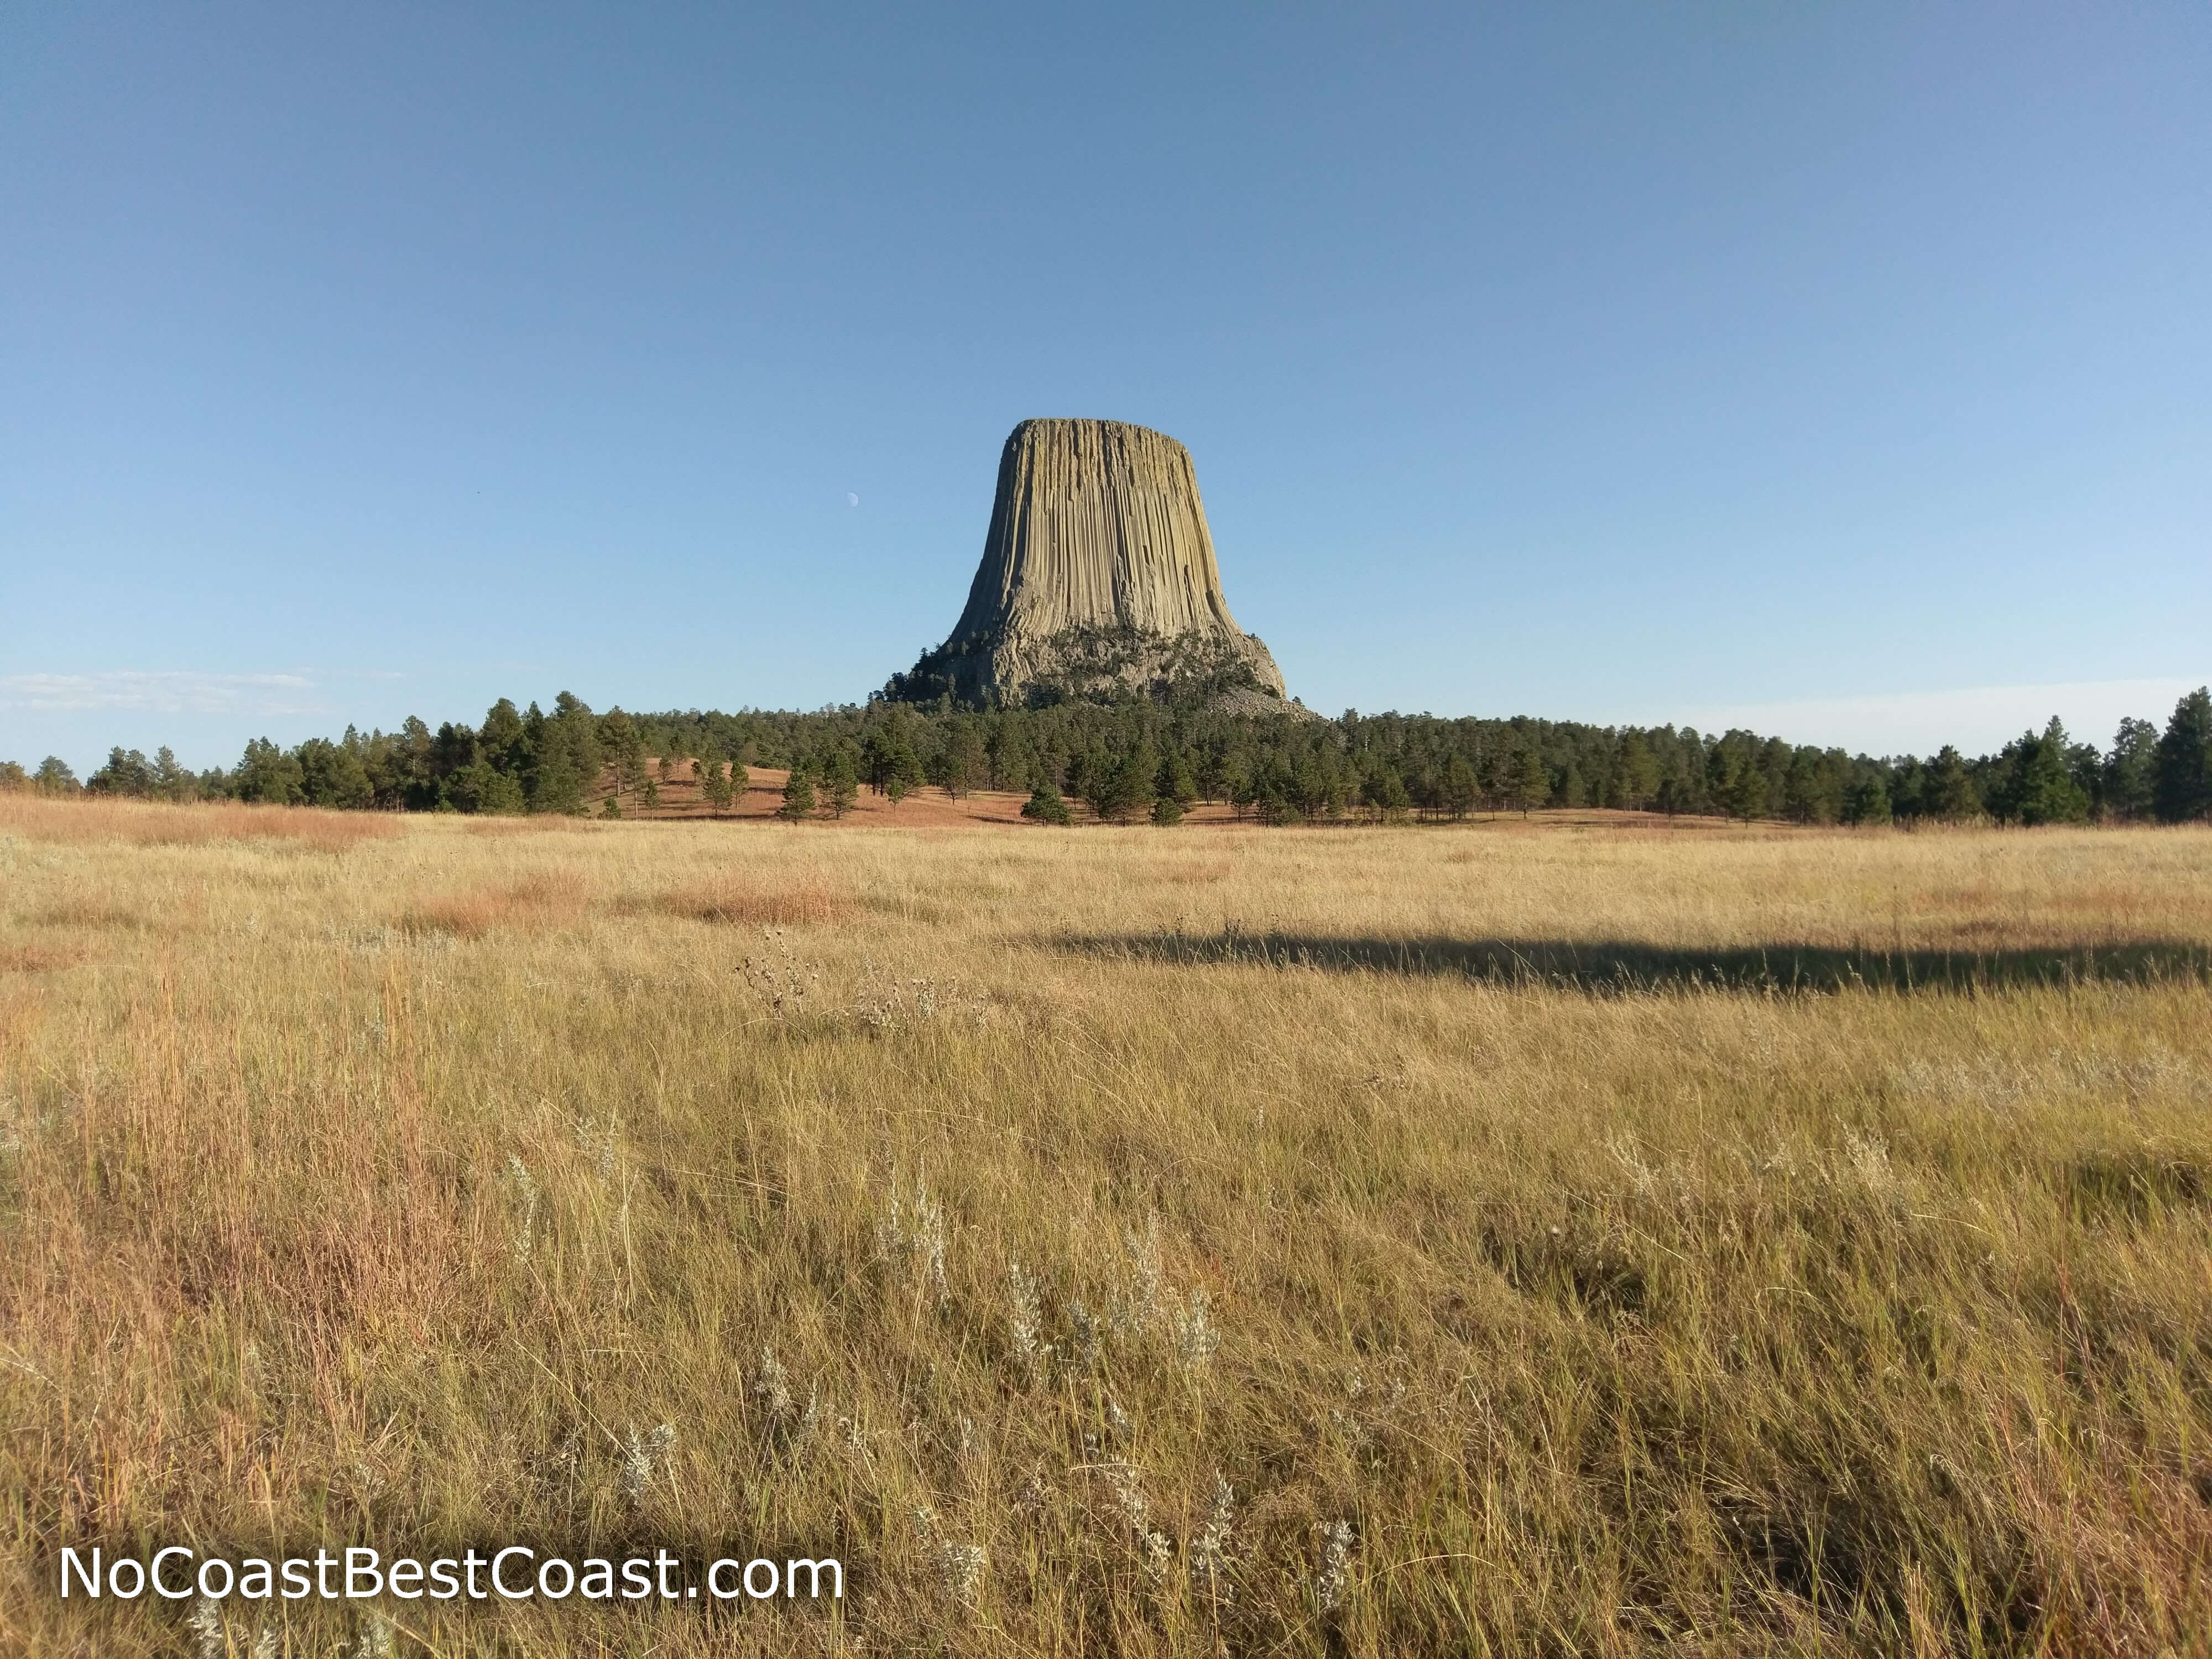 Devils Tower is perhaps one of the most famous national monuments